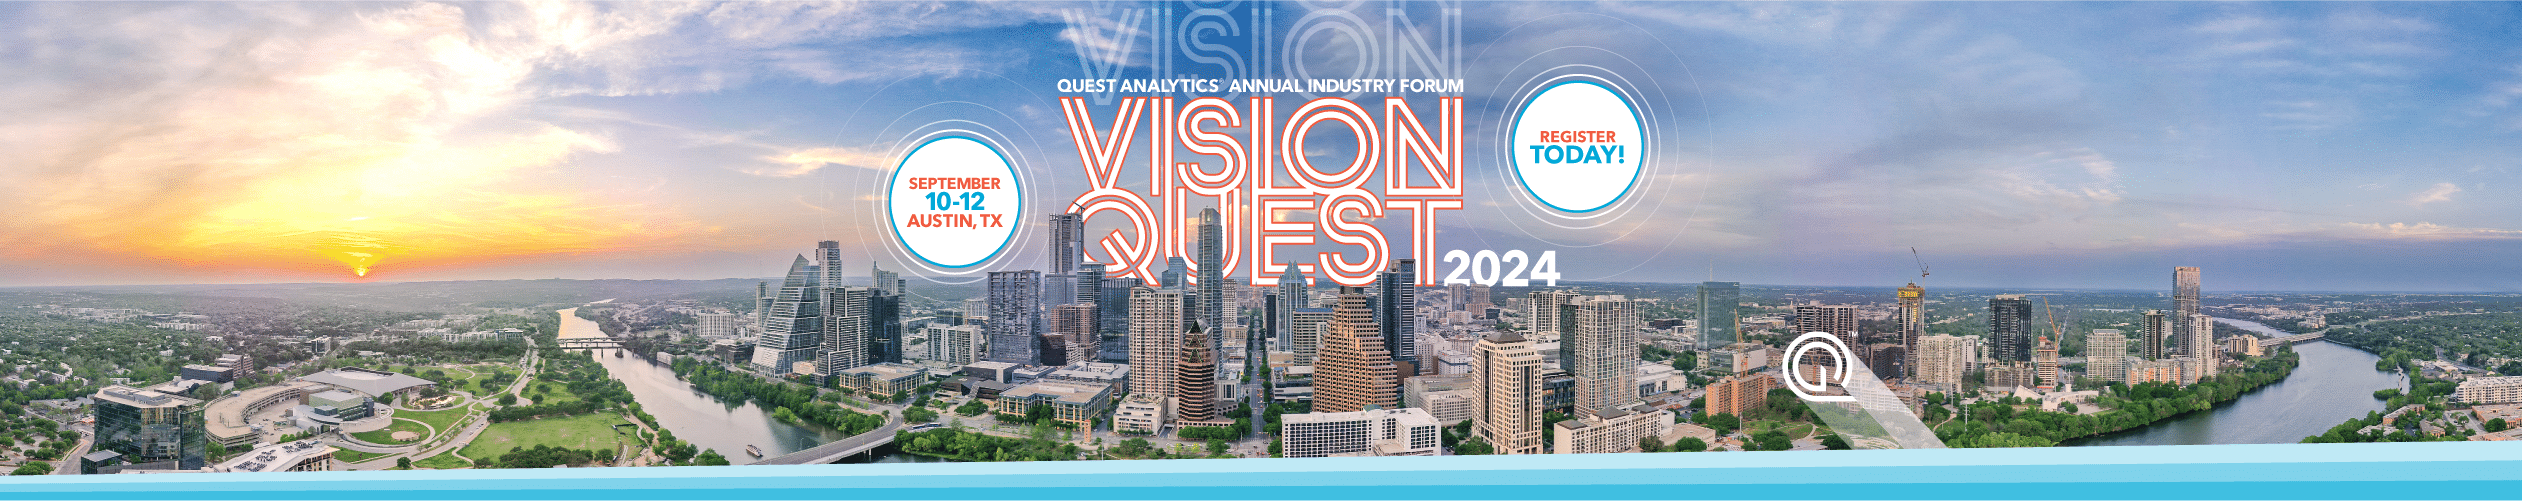 Quest Analytics Annual Industry Forum Vision Quest September 10-12, 2024 Register Today!